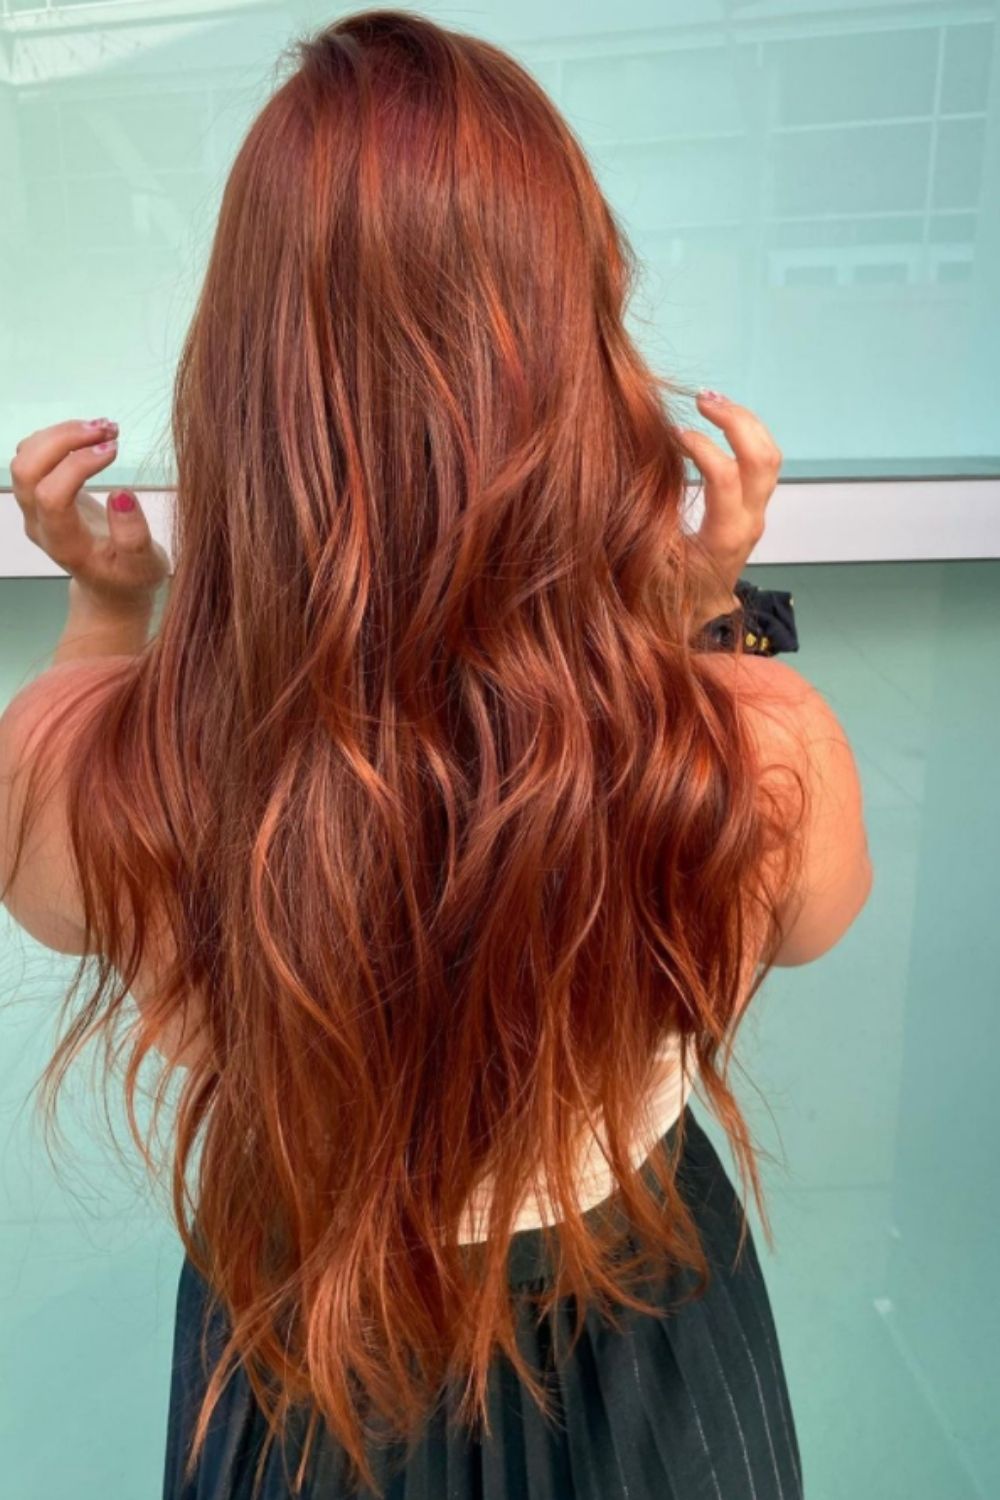 Red hair color | 35 Best Red hair color You should Try